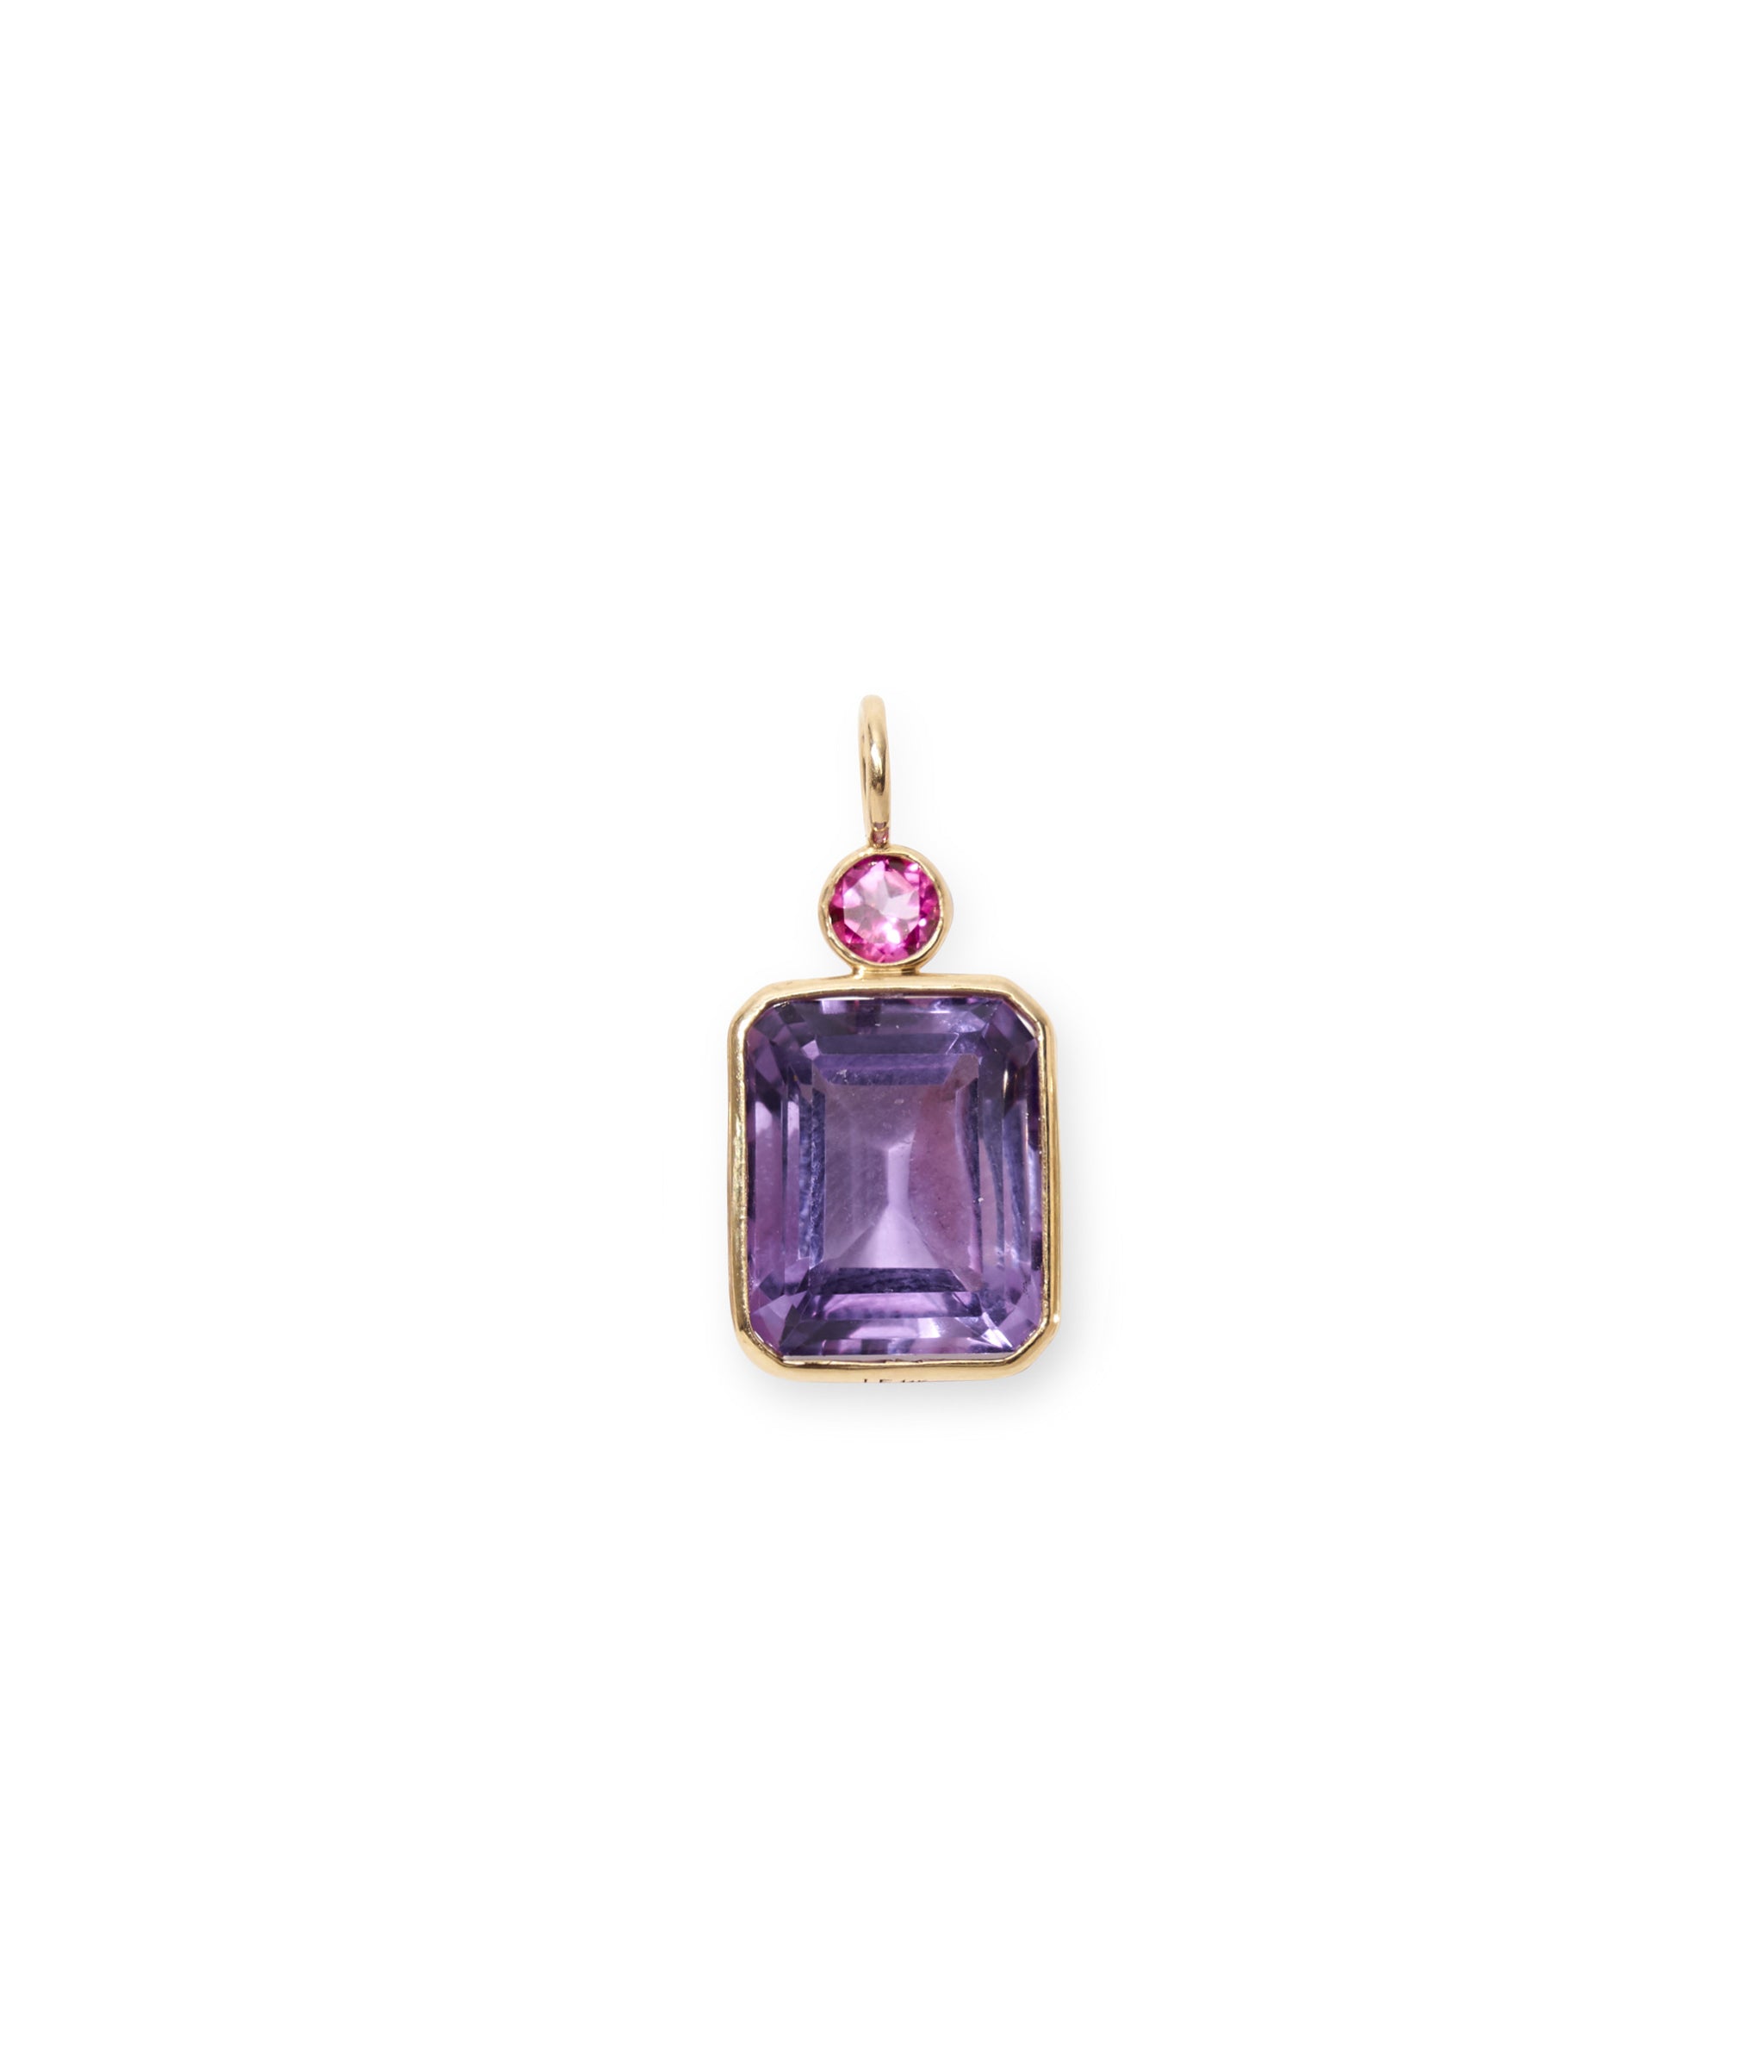 Pink Topaz & Amethyst 14k Gold Necklace Charm. Faceted round hot pink topaz and  amethyst rectangle charm with gold bezels